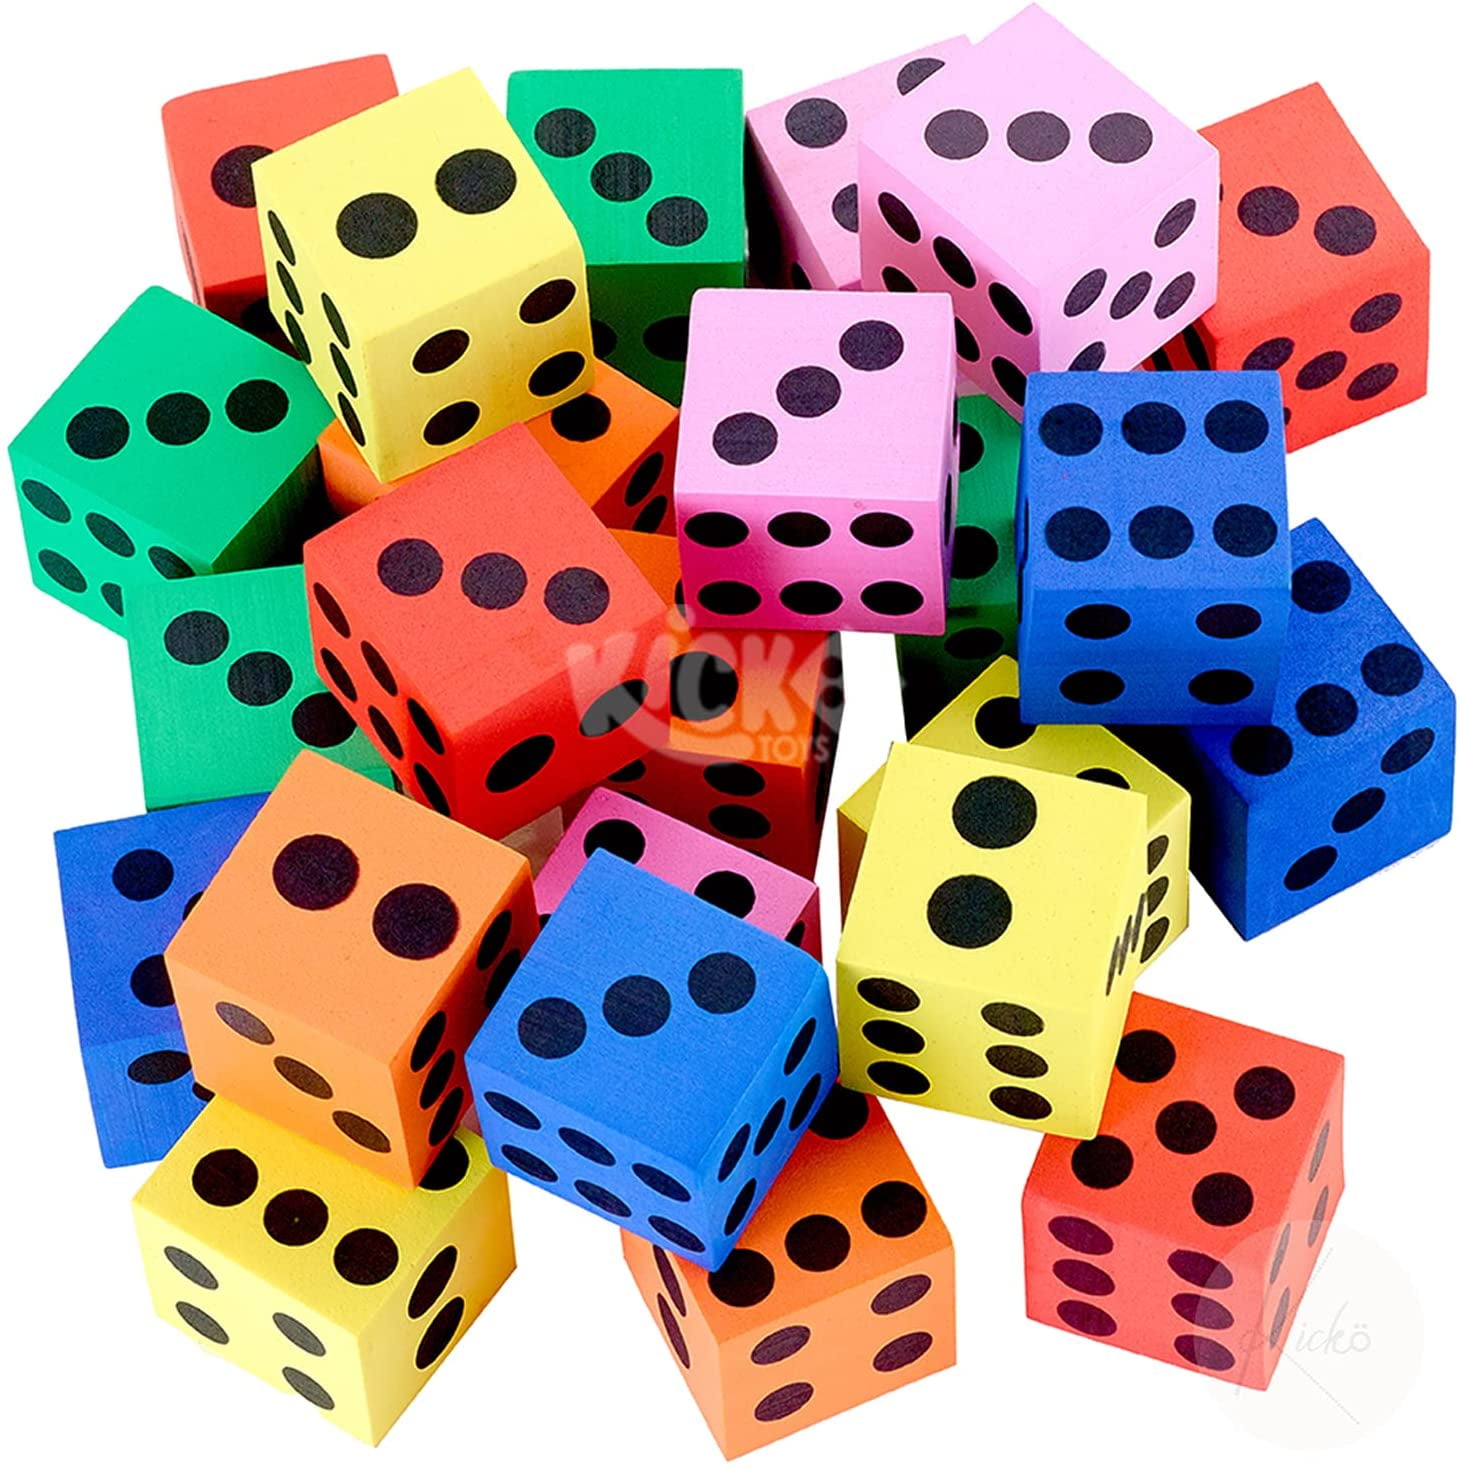 Lot of 6 Assorted Colored Foam Dice 1.5" D6 Gaming Casino 